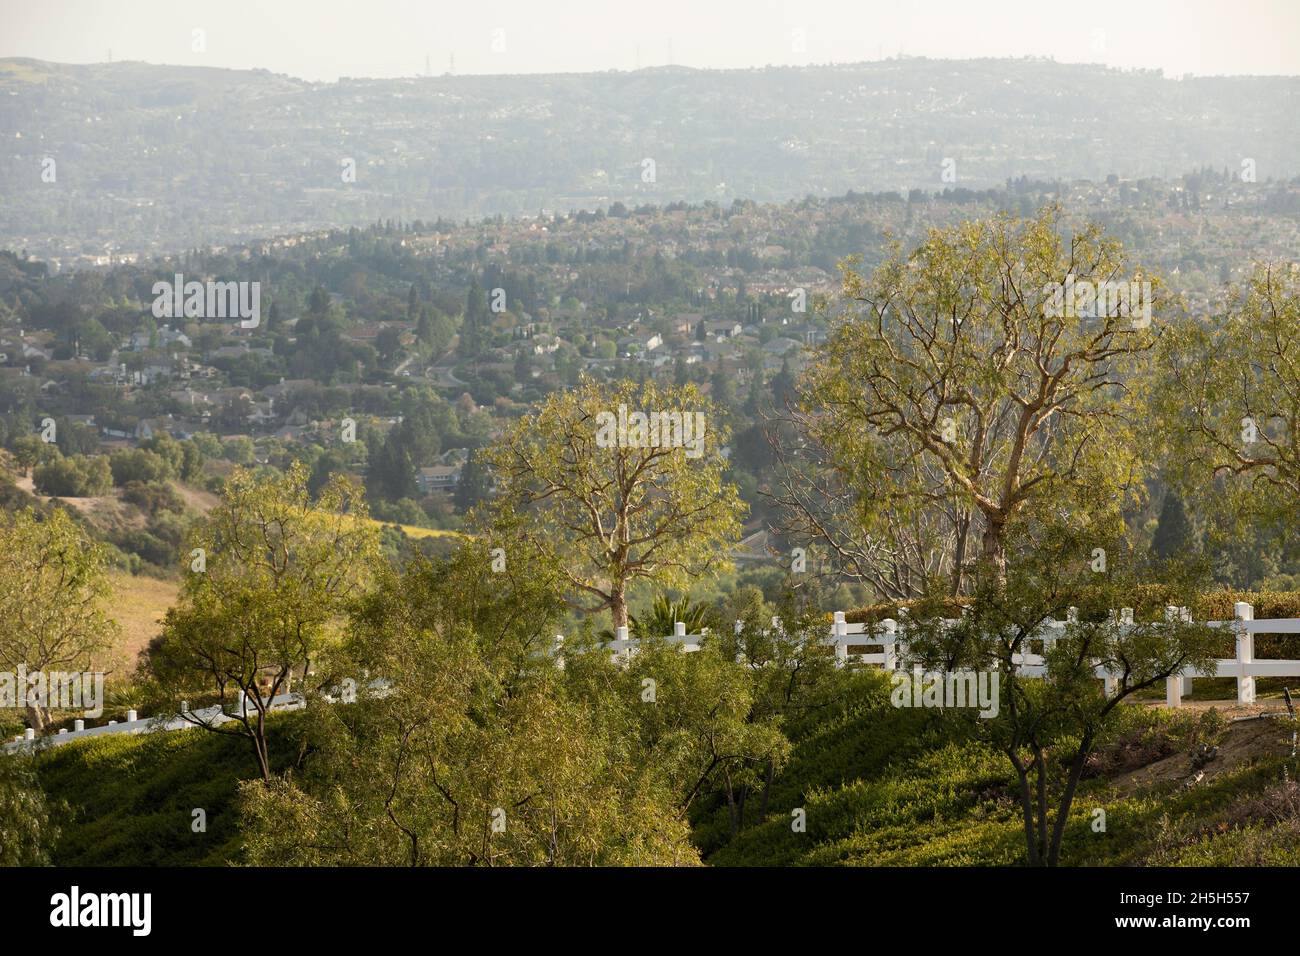 Daytime view of a public trail and city view of Yorba Linda, California, USA. Stock Photo